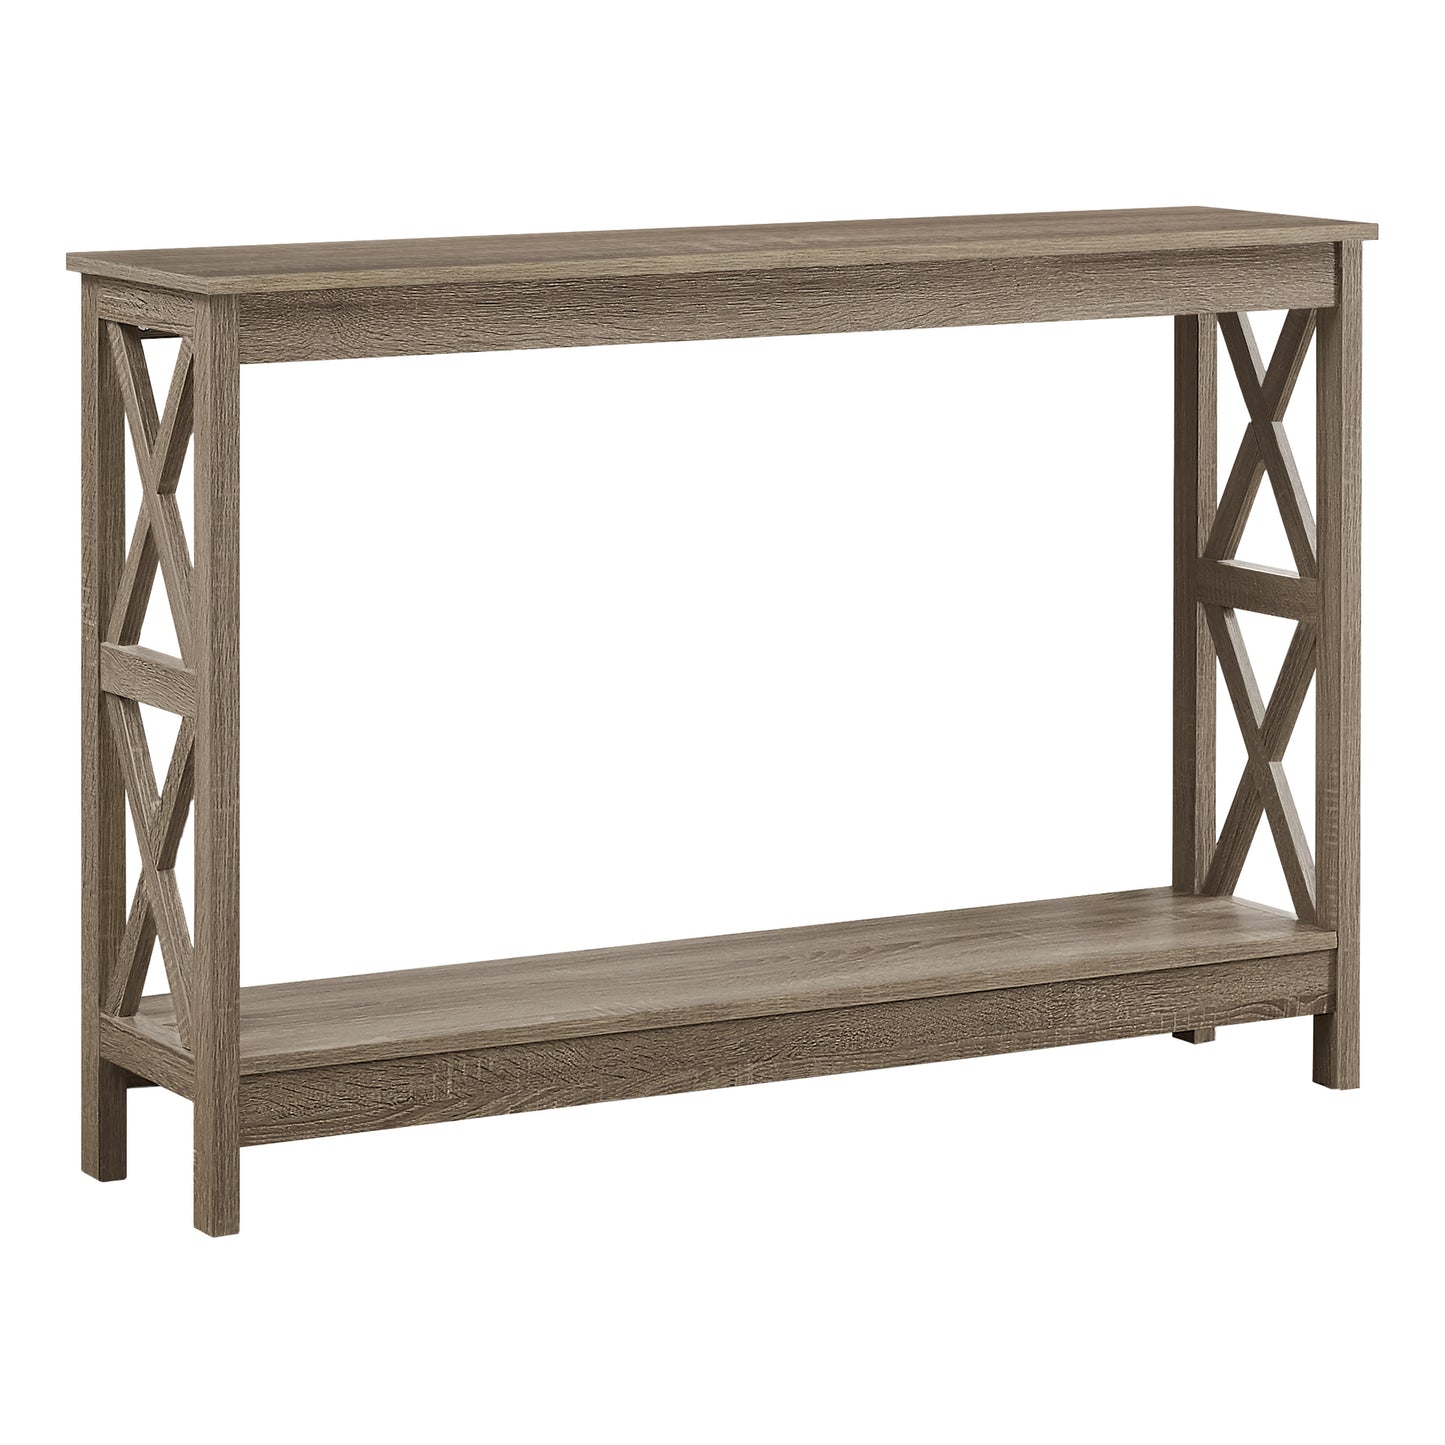 Modern 48L Narrow Wood Console Table in Dark Taupe Finish